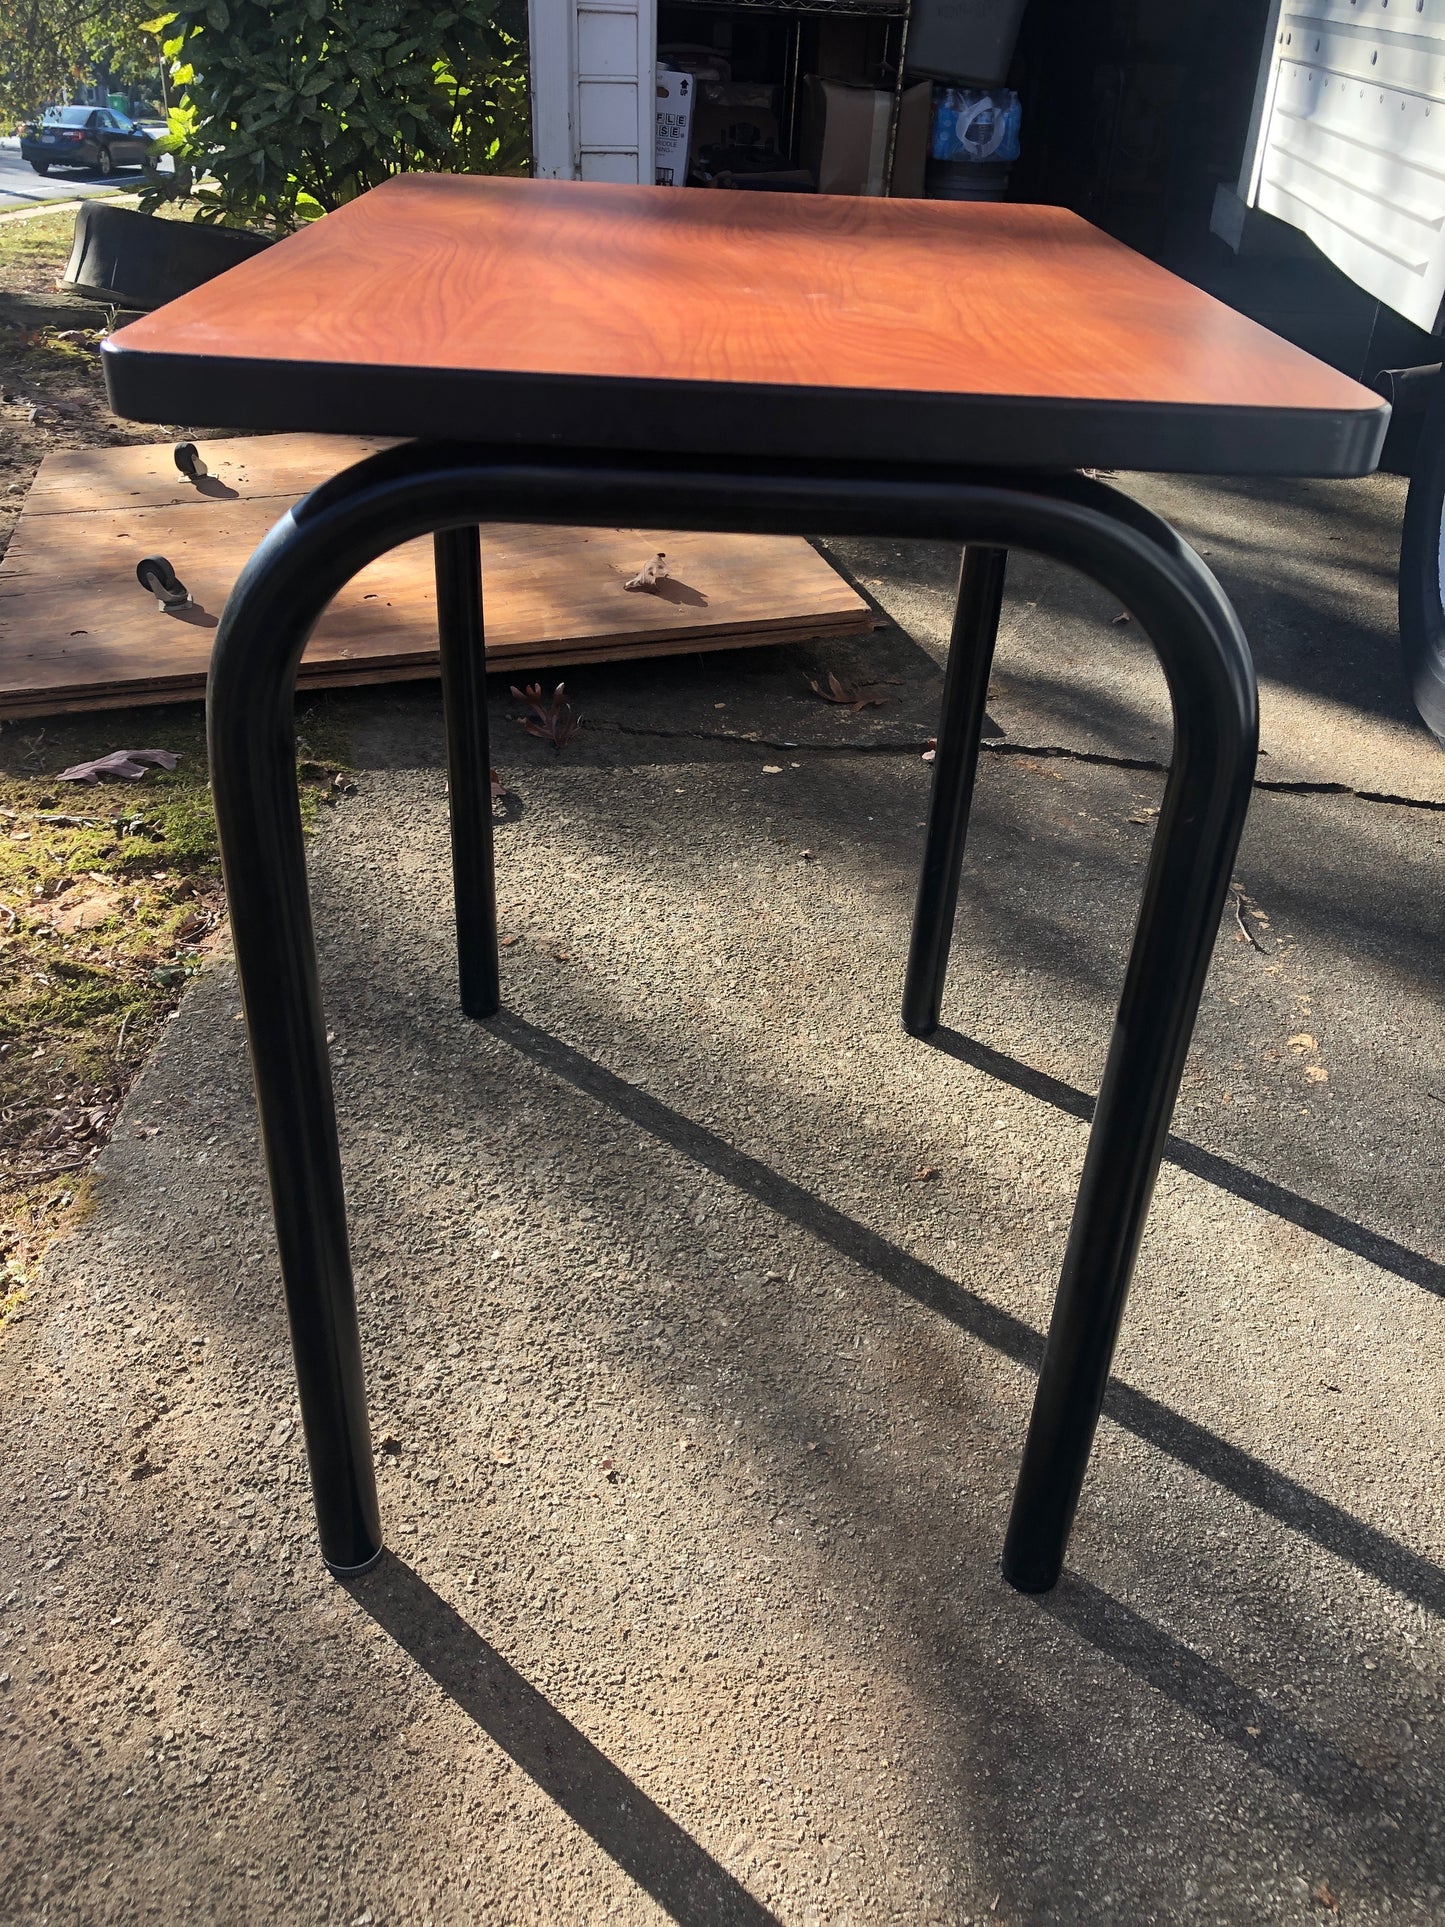 TABLES GREAT CONDITION - PRICED TO MOVE - SELLING FAST